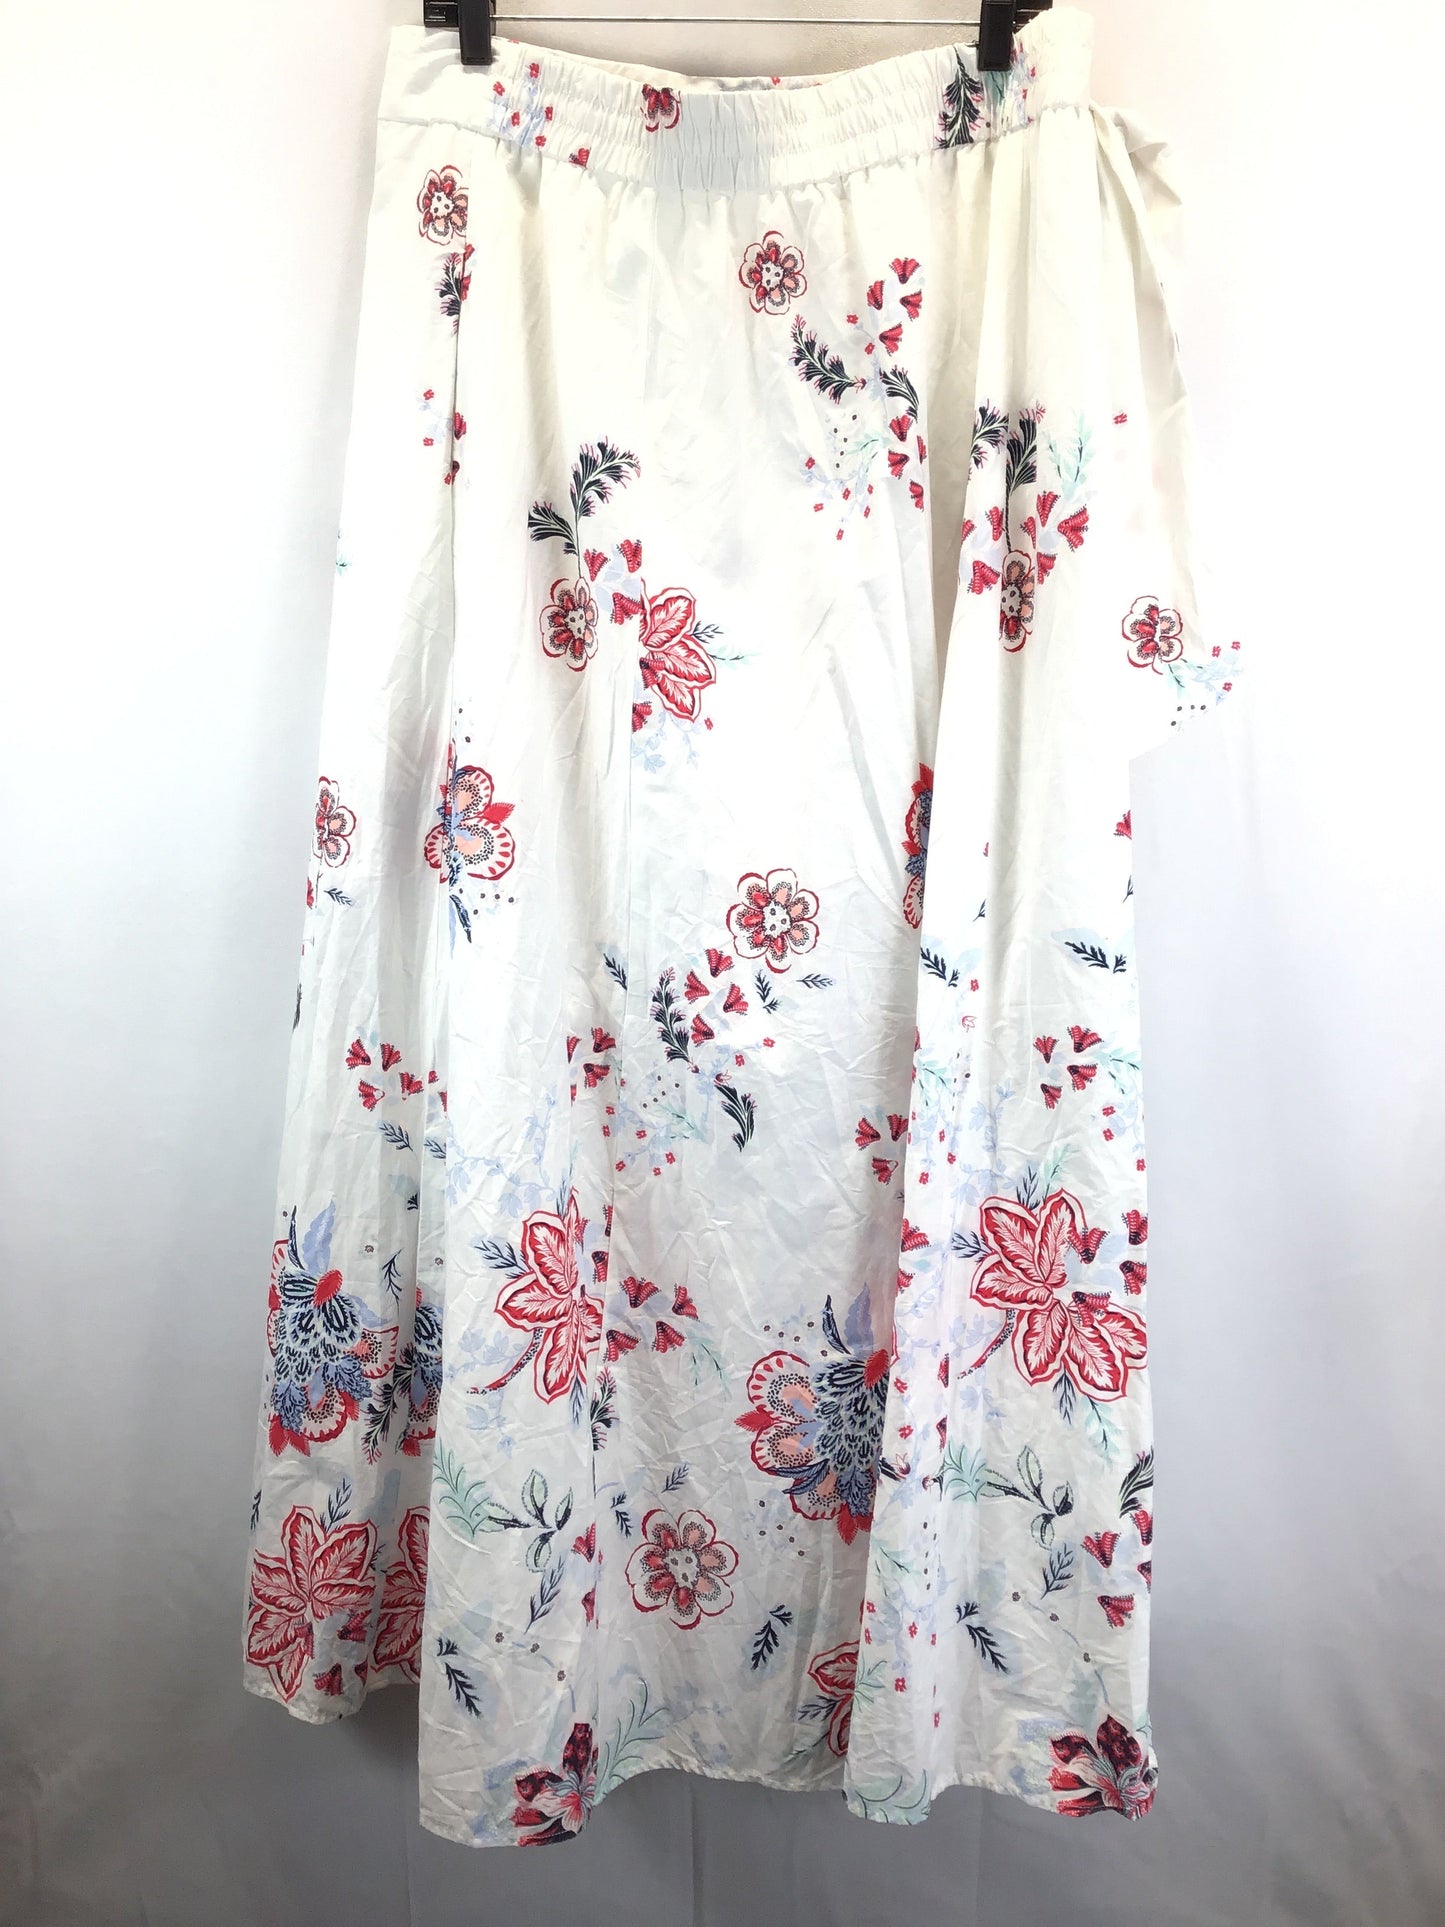 Floral Print Skirt Maxi New York And Co, Size Xl